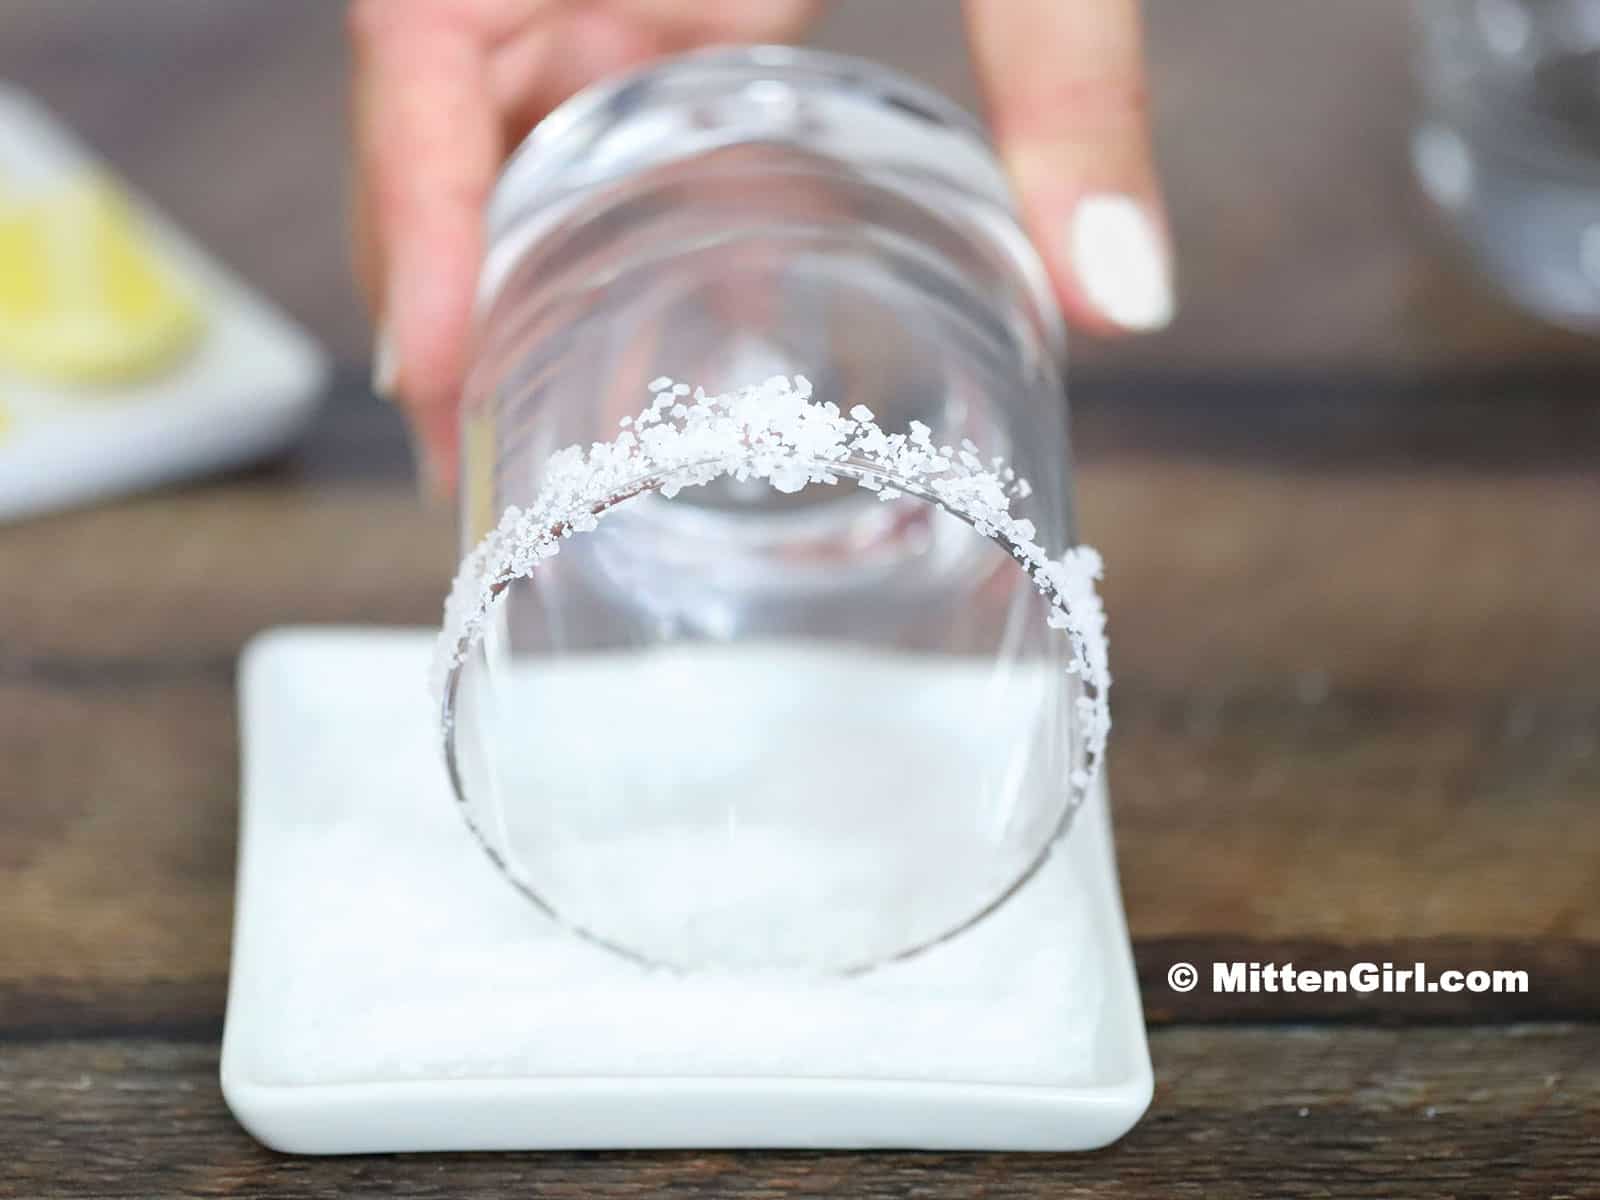 The rim of a glass being dipped in a shallow dish of salt.